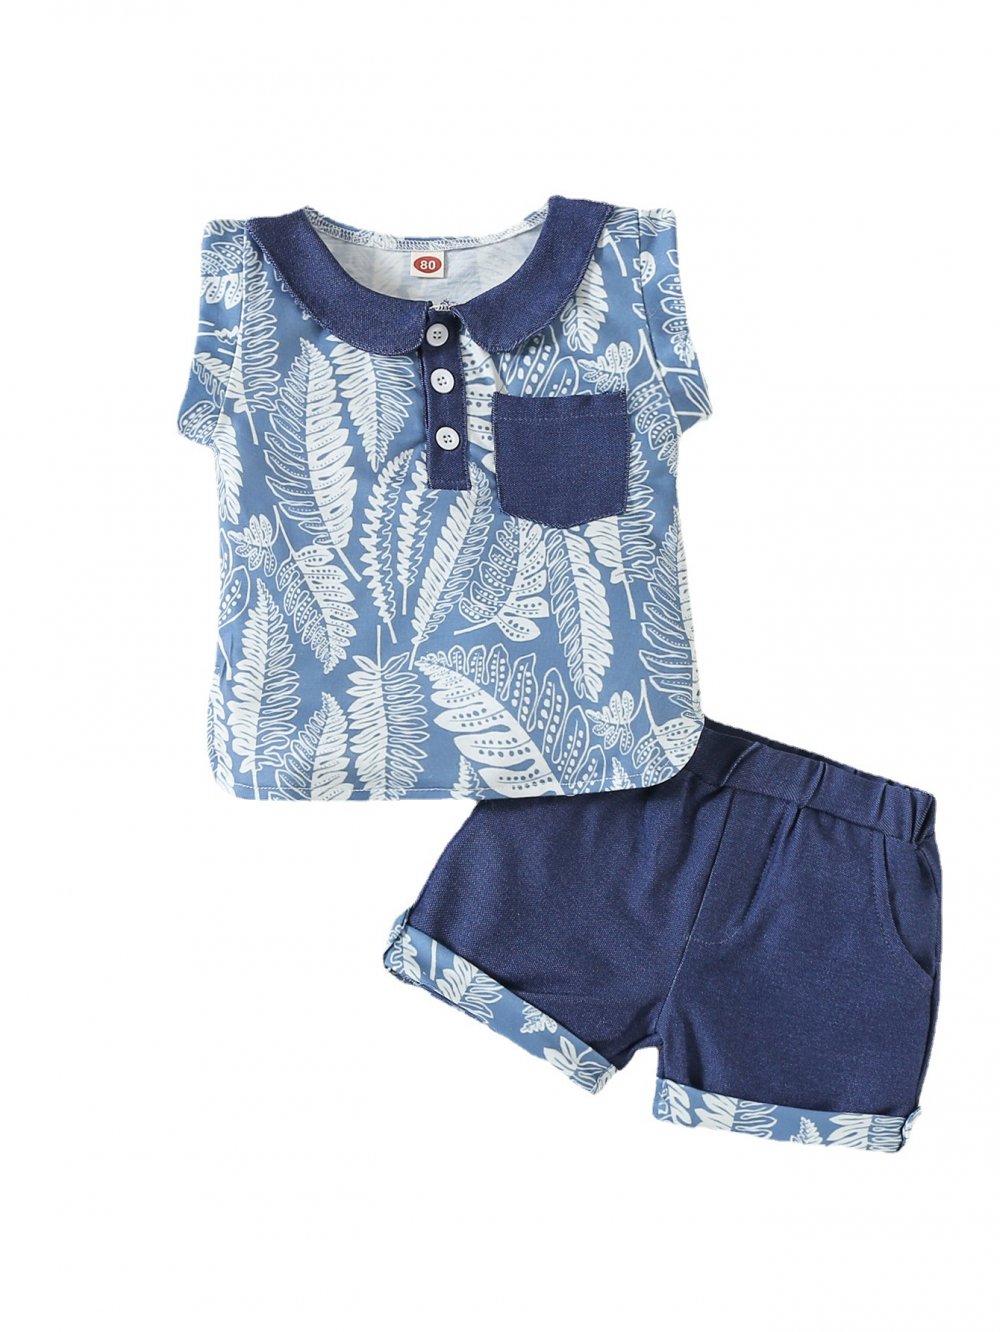 Baby Boys Short Set Summer Sleeveless Leaf Printed Vest Tank Top and Shorts wholesale baby boy clothes